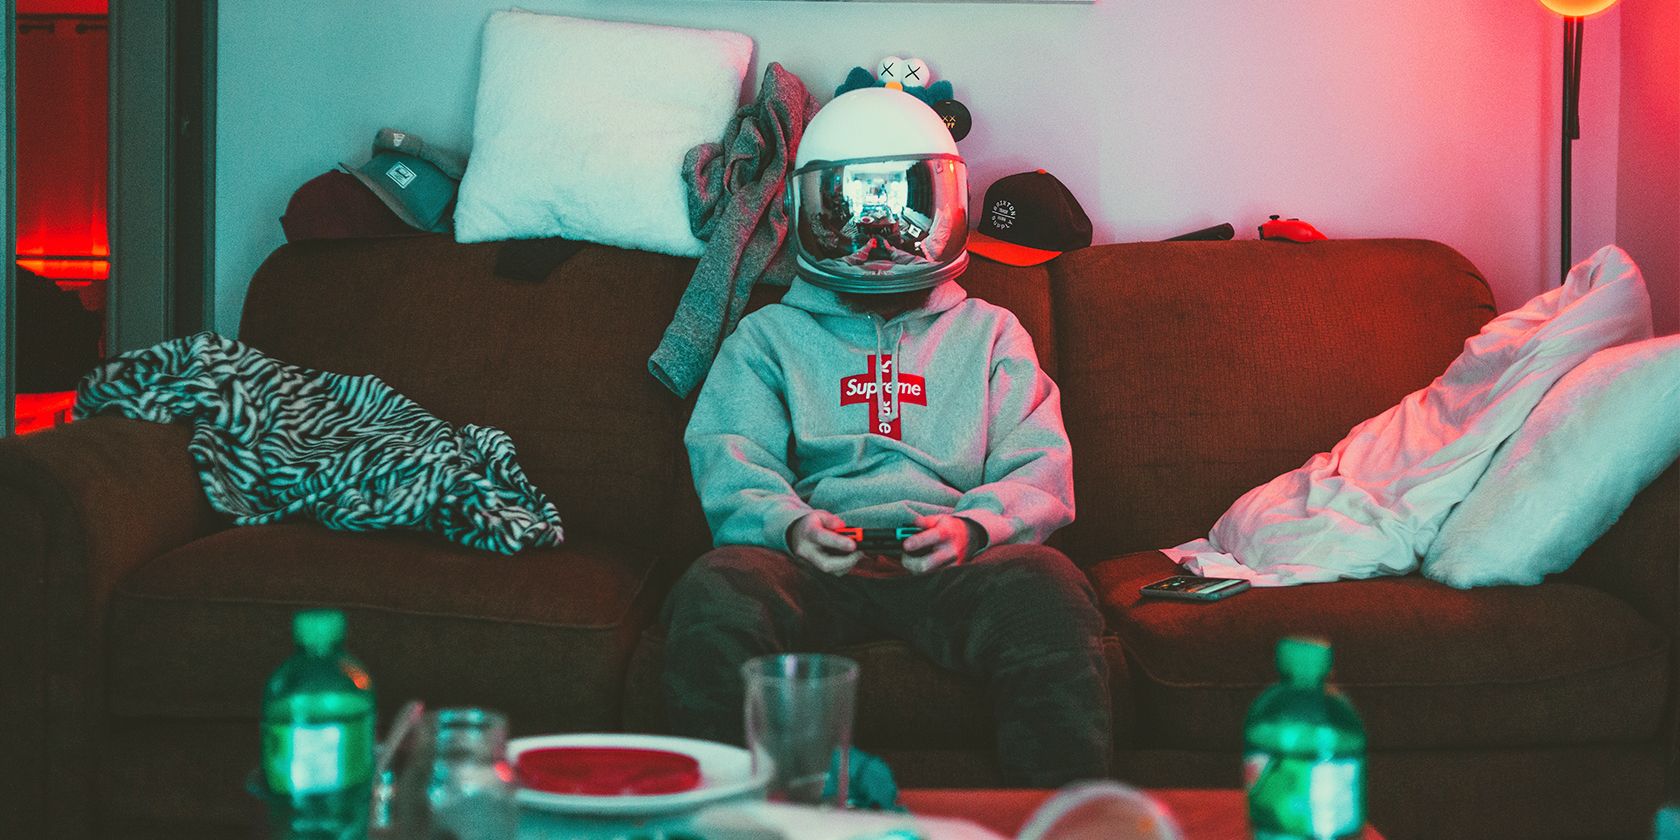 A Bored Gamer Playing Games on the Couch